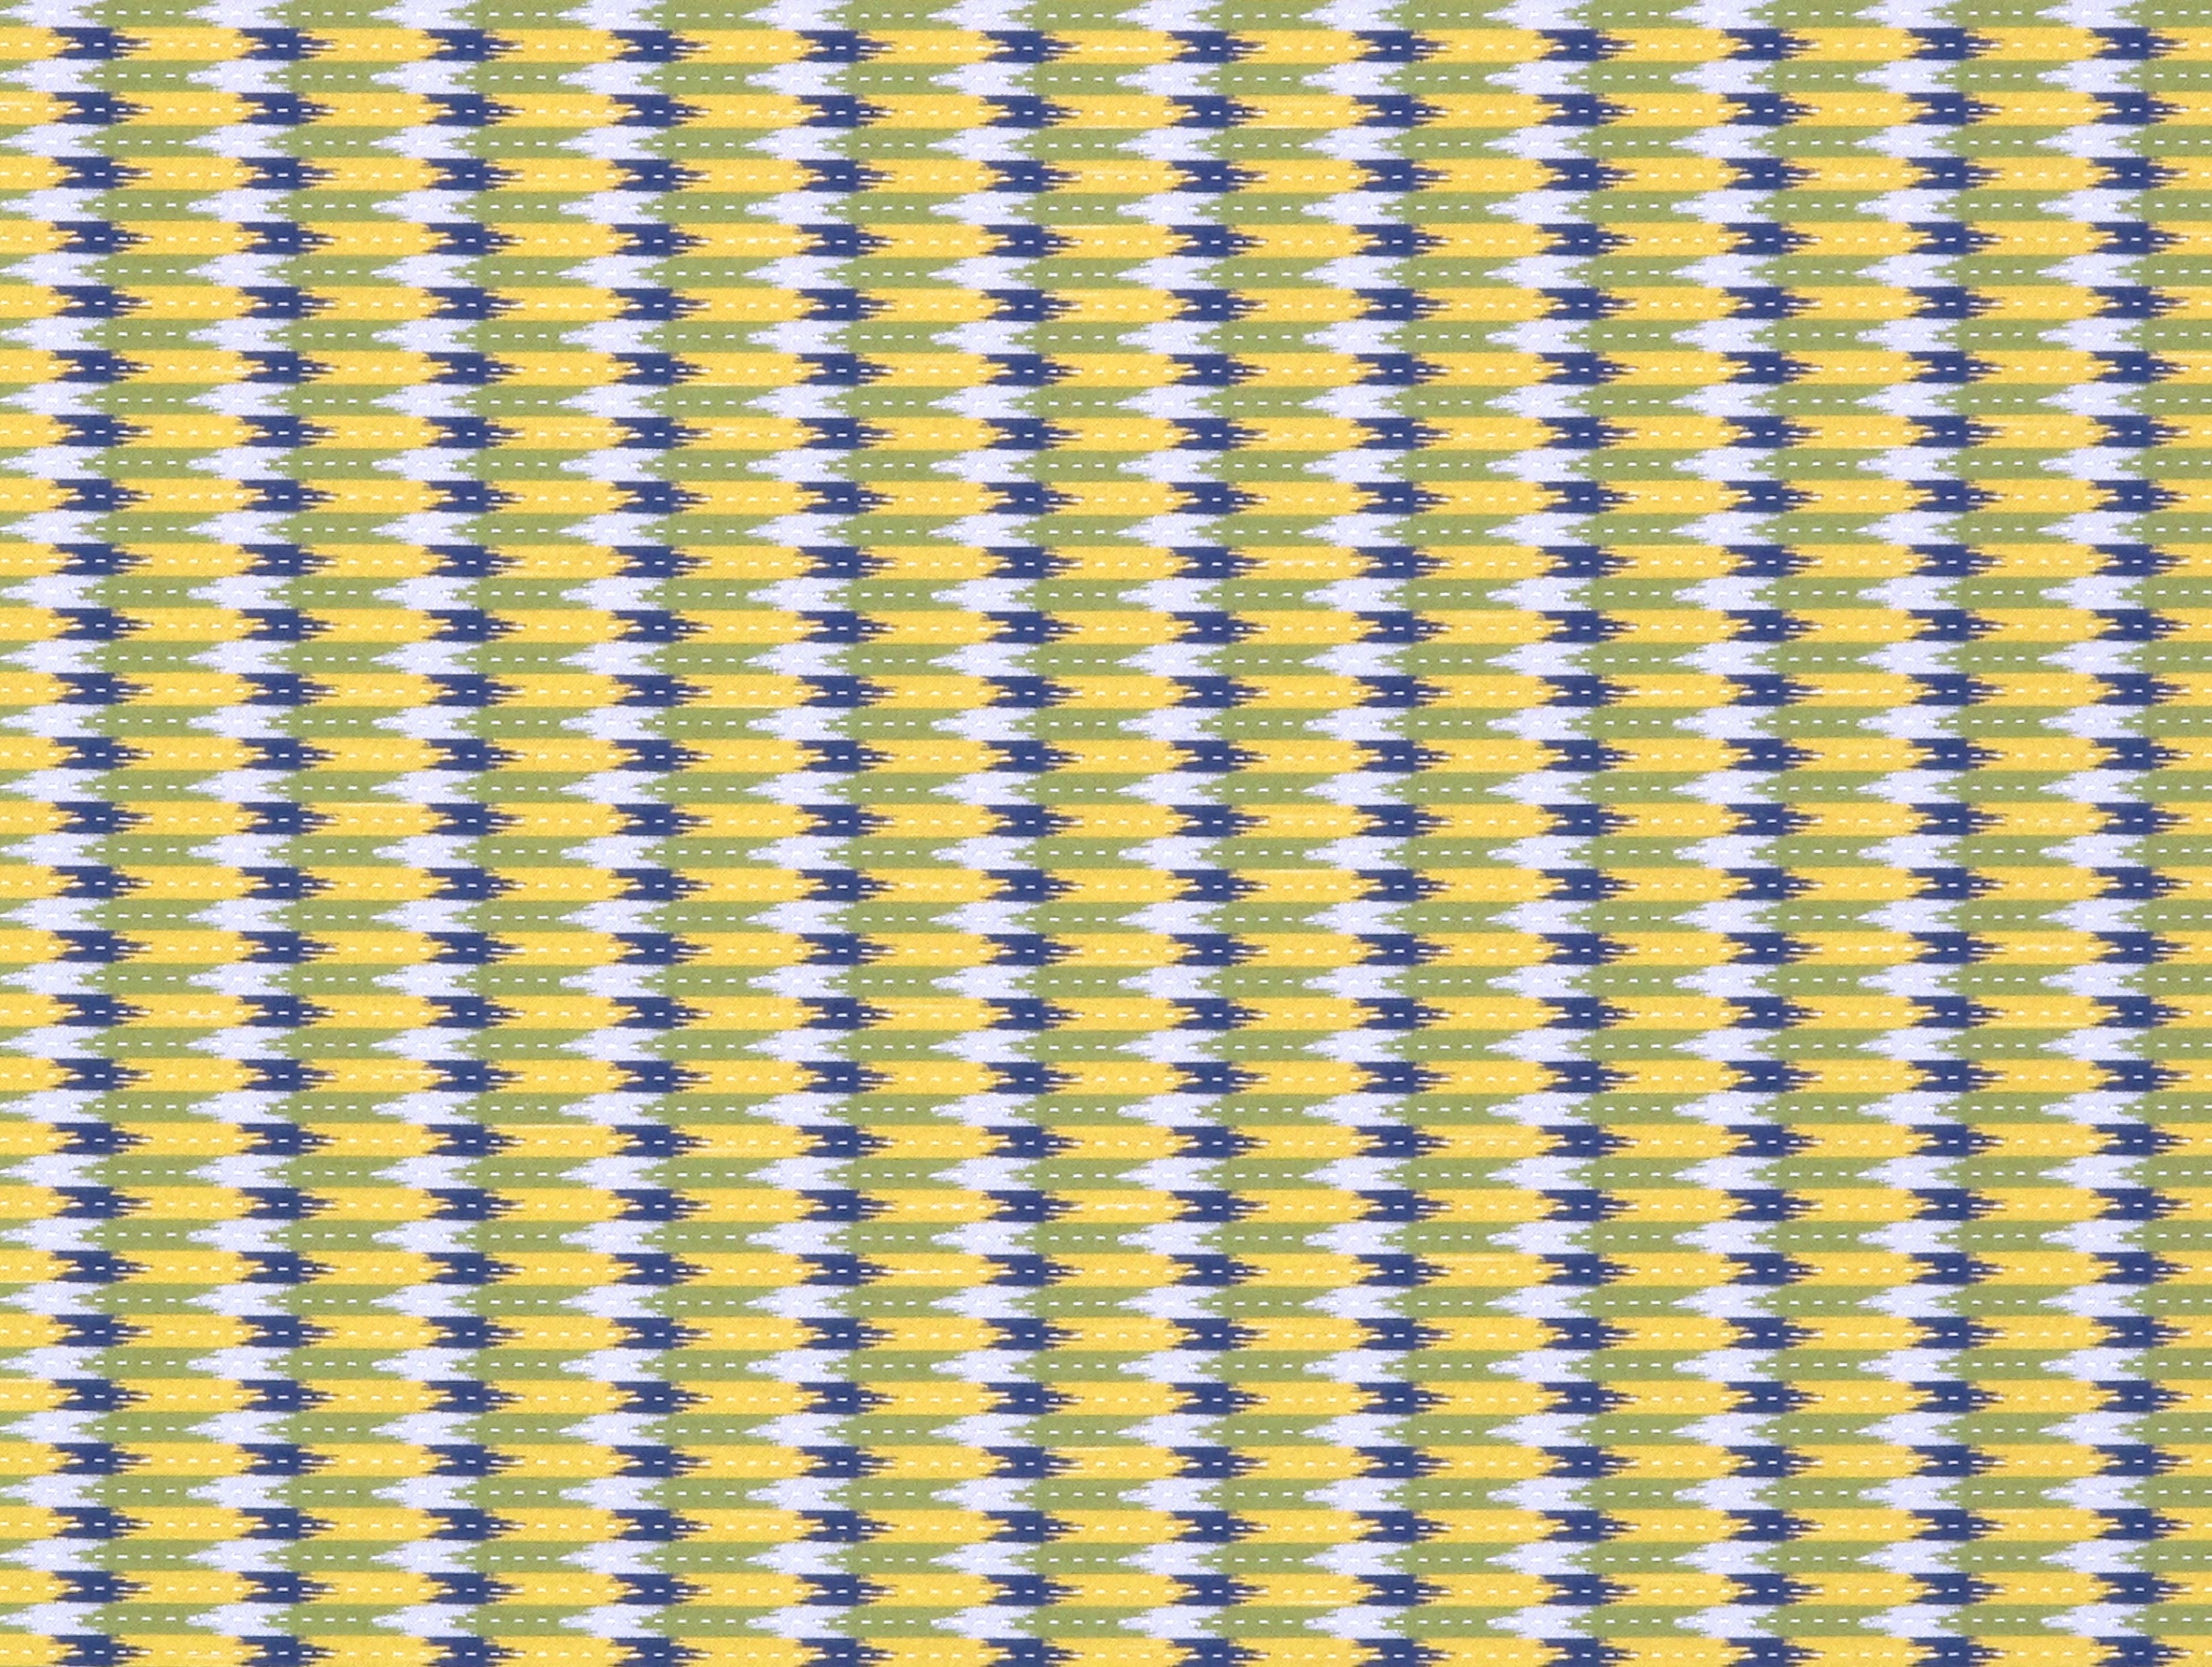 Windward Point fabric in lemon indigo color - pattern number GH 00292145 - by Scalamandre in the Old World Weavers collection